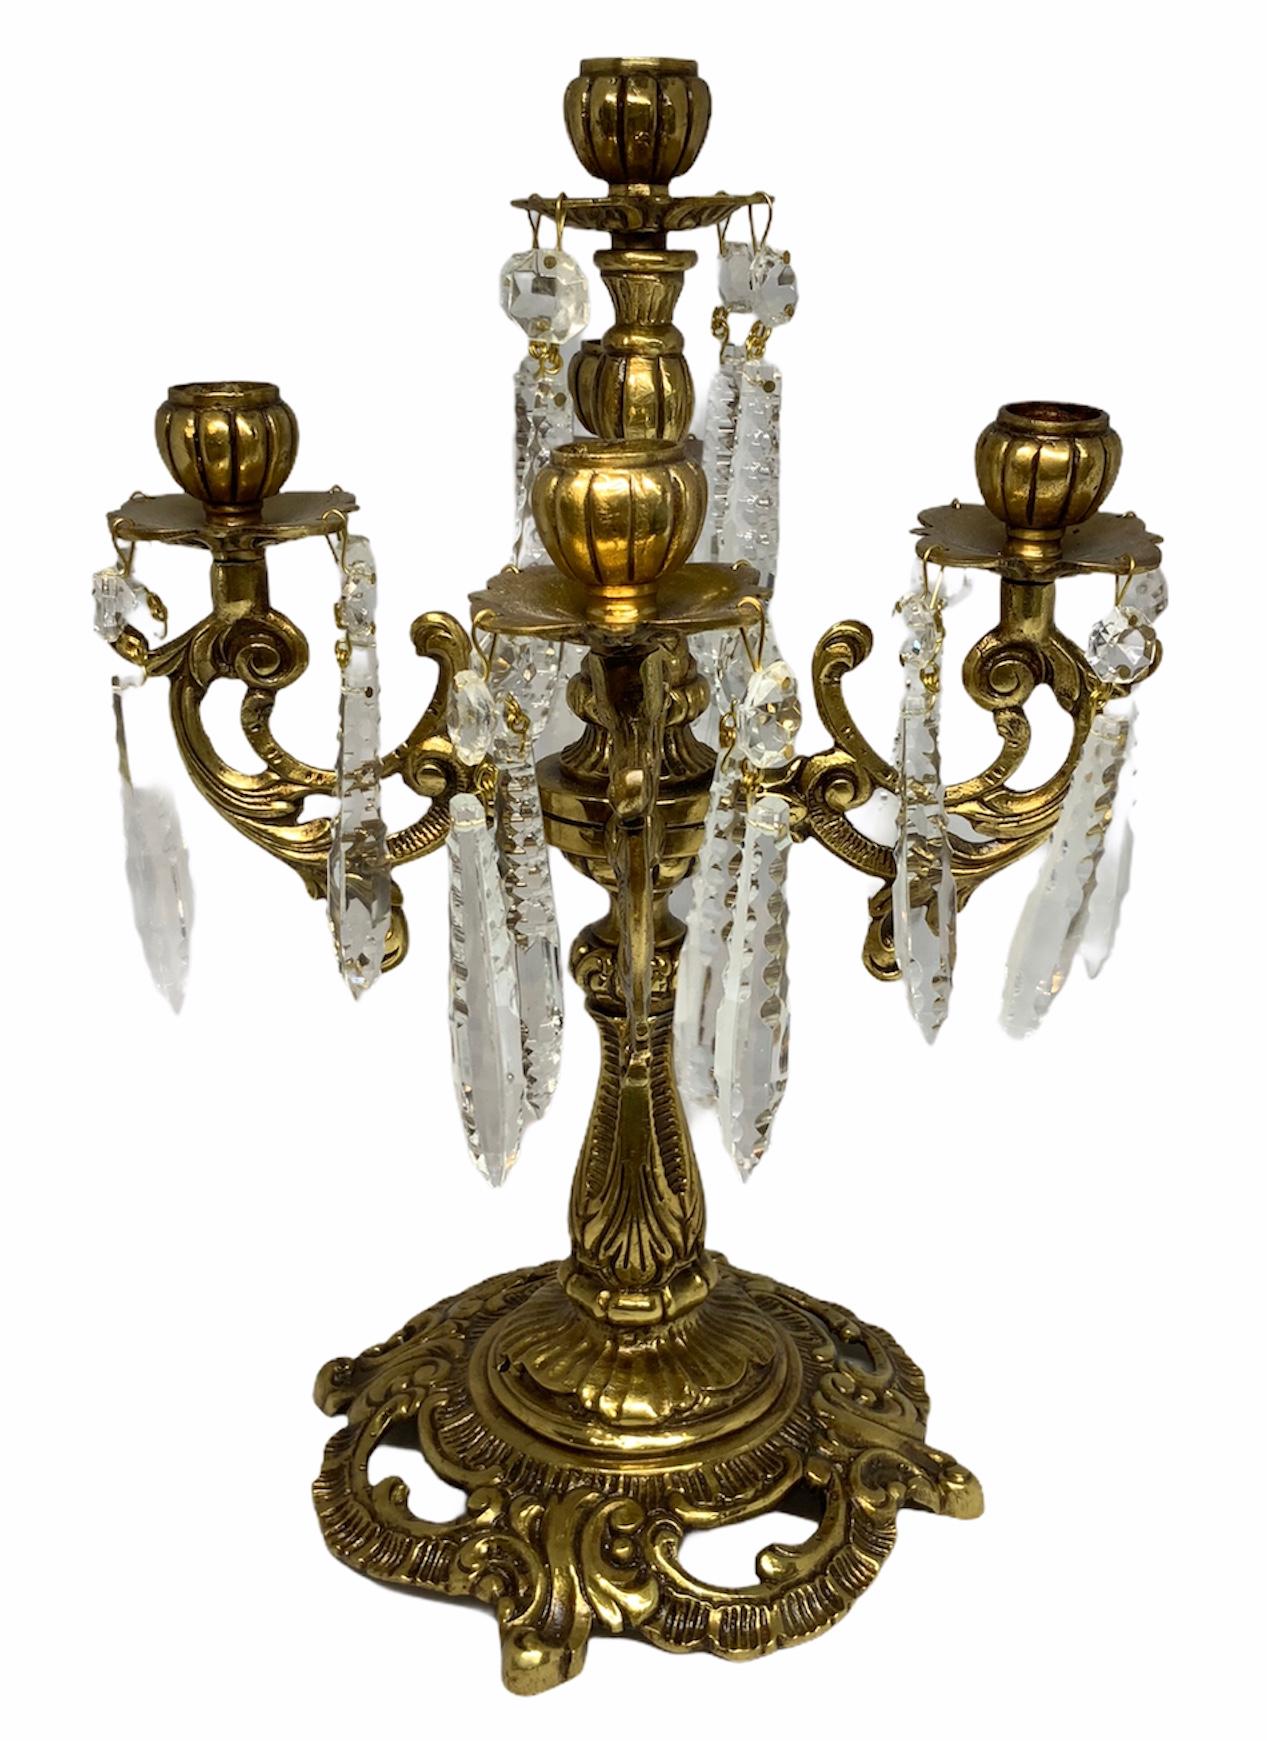 A French Louis XV Rococo candelabra with five ribbed candleholders each one. They are highlighted by a total of forty crystal etched prisms.